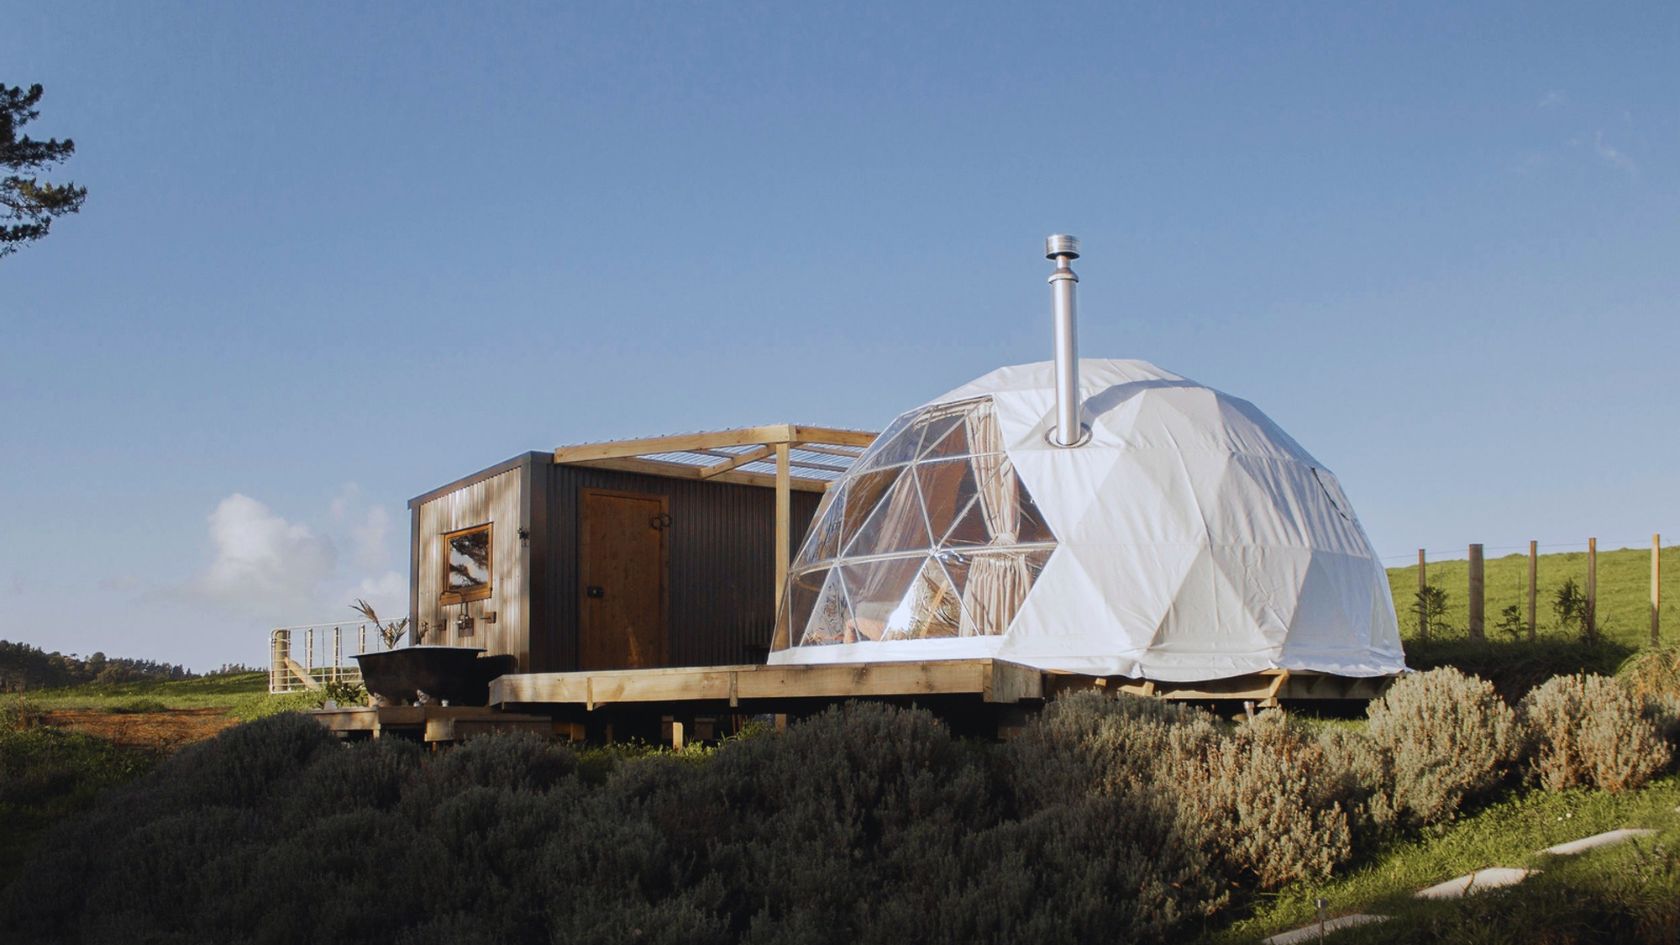 Sustainable Glamping Dome Structures